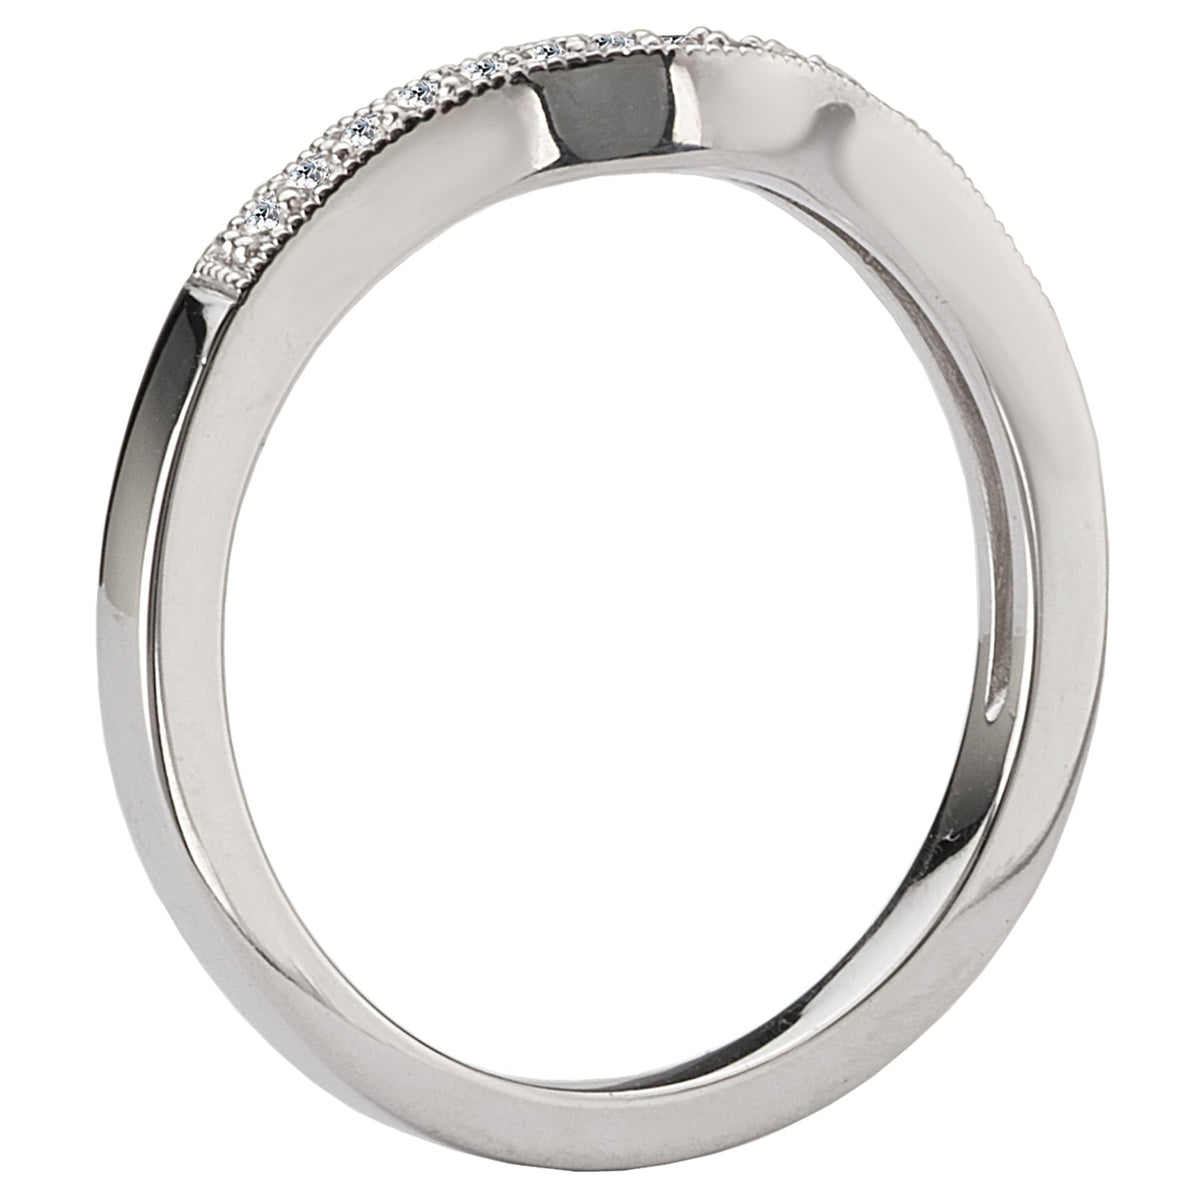 14KT White Gold .08 CTW Vintage Curved Wedding Band 4,4.5,5,5.5,6,6.5,7,7.5,8,8.5,9